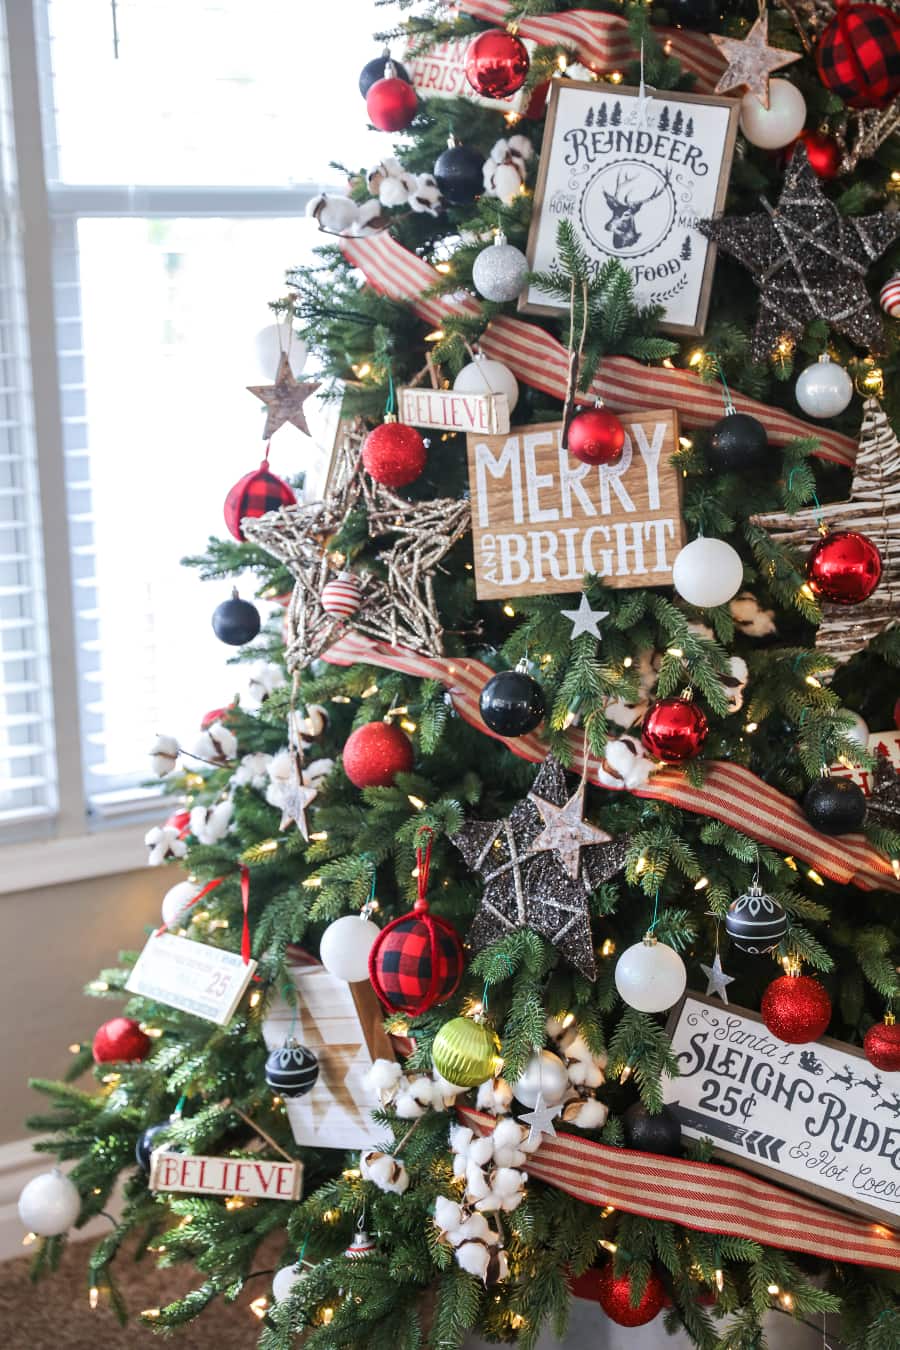 BEAUTIFUL Christmas Home Tour - pretty and festive ideas to help you decorate your own home for the holidays.